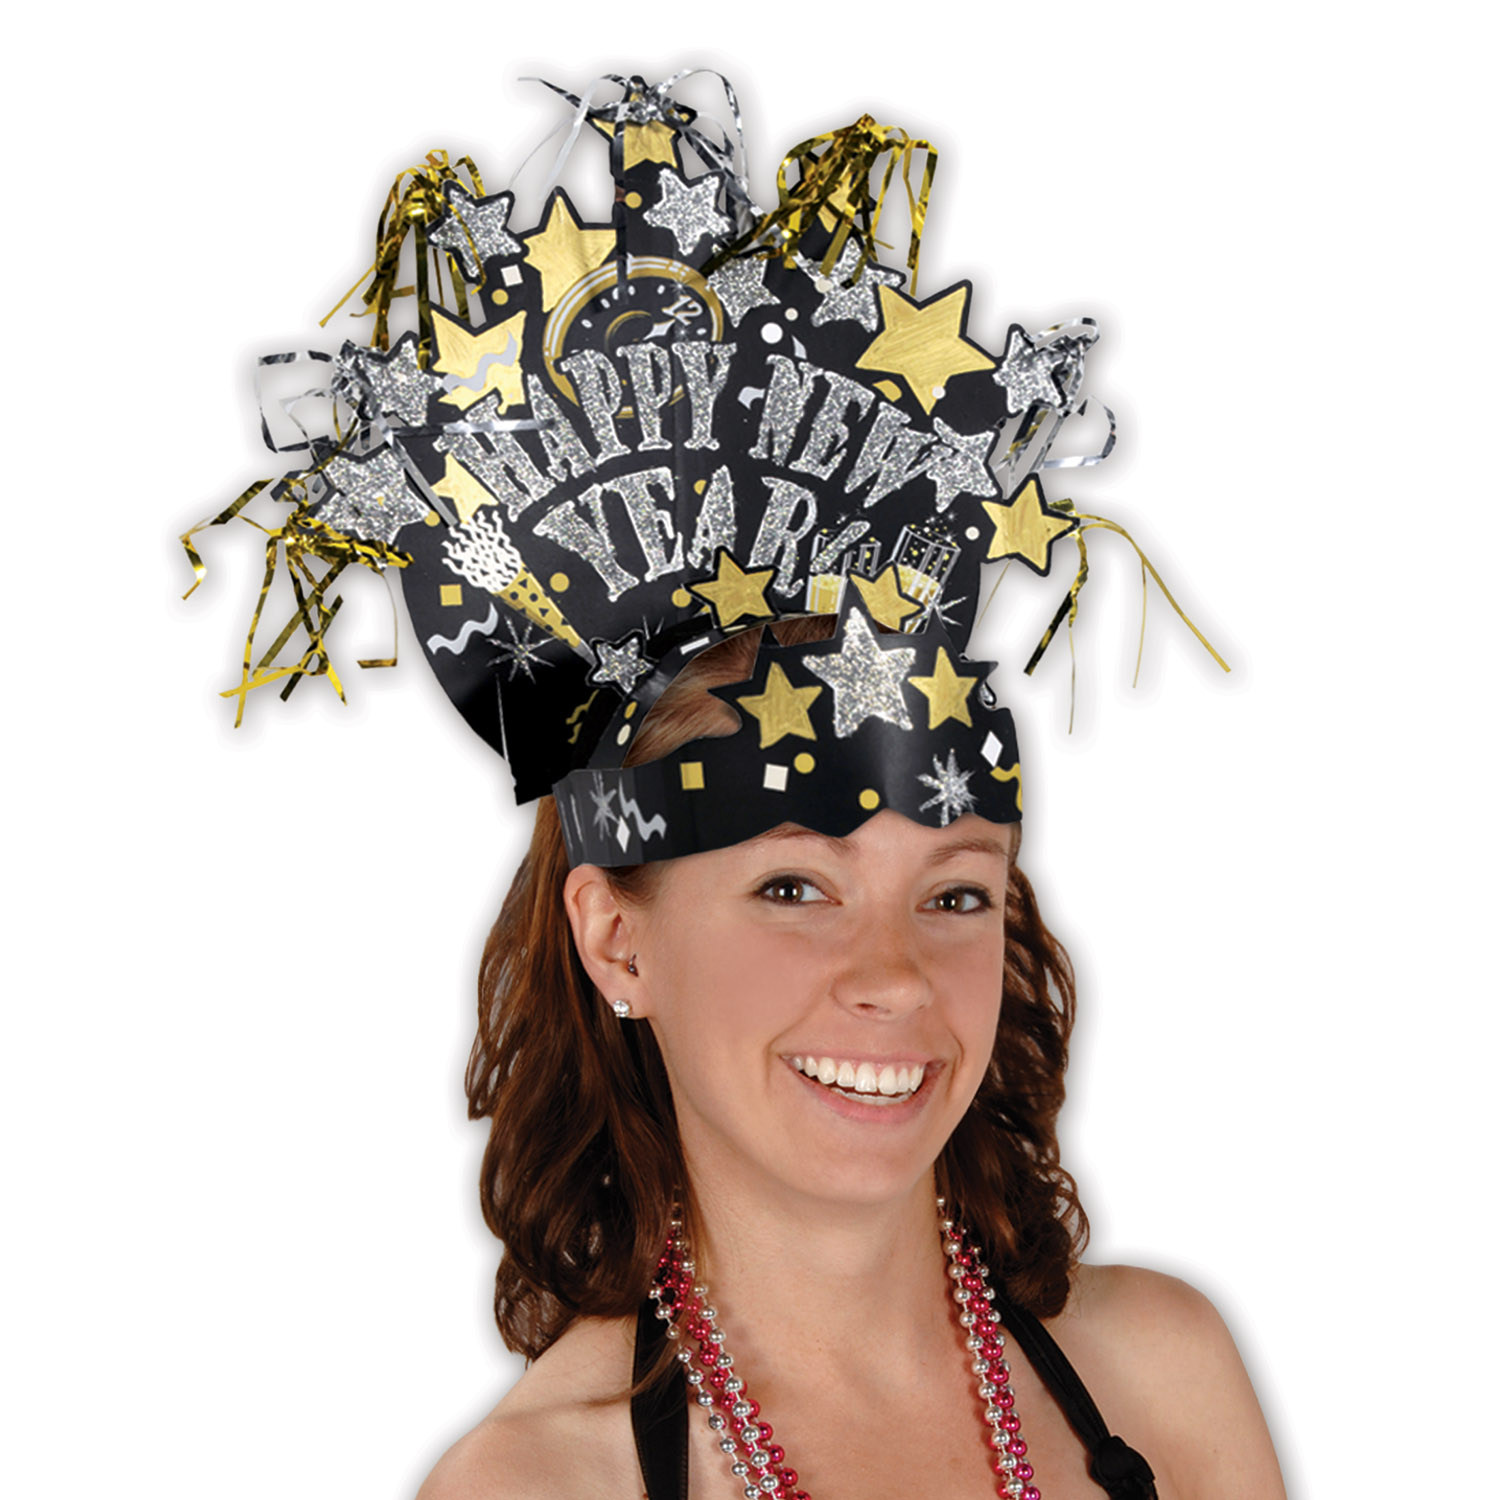 Glittered New Years Eve  headwear overflowing in colors gold, silver and black.